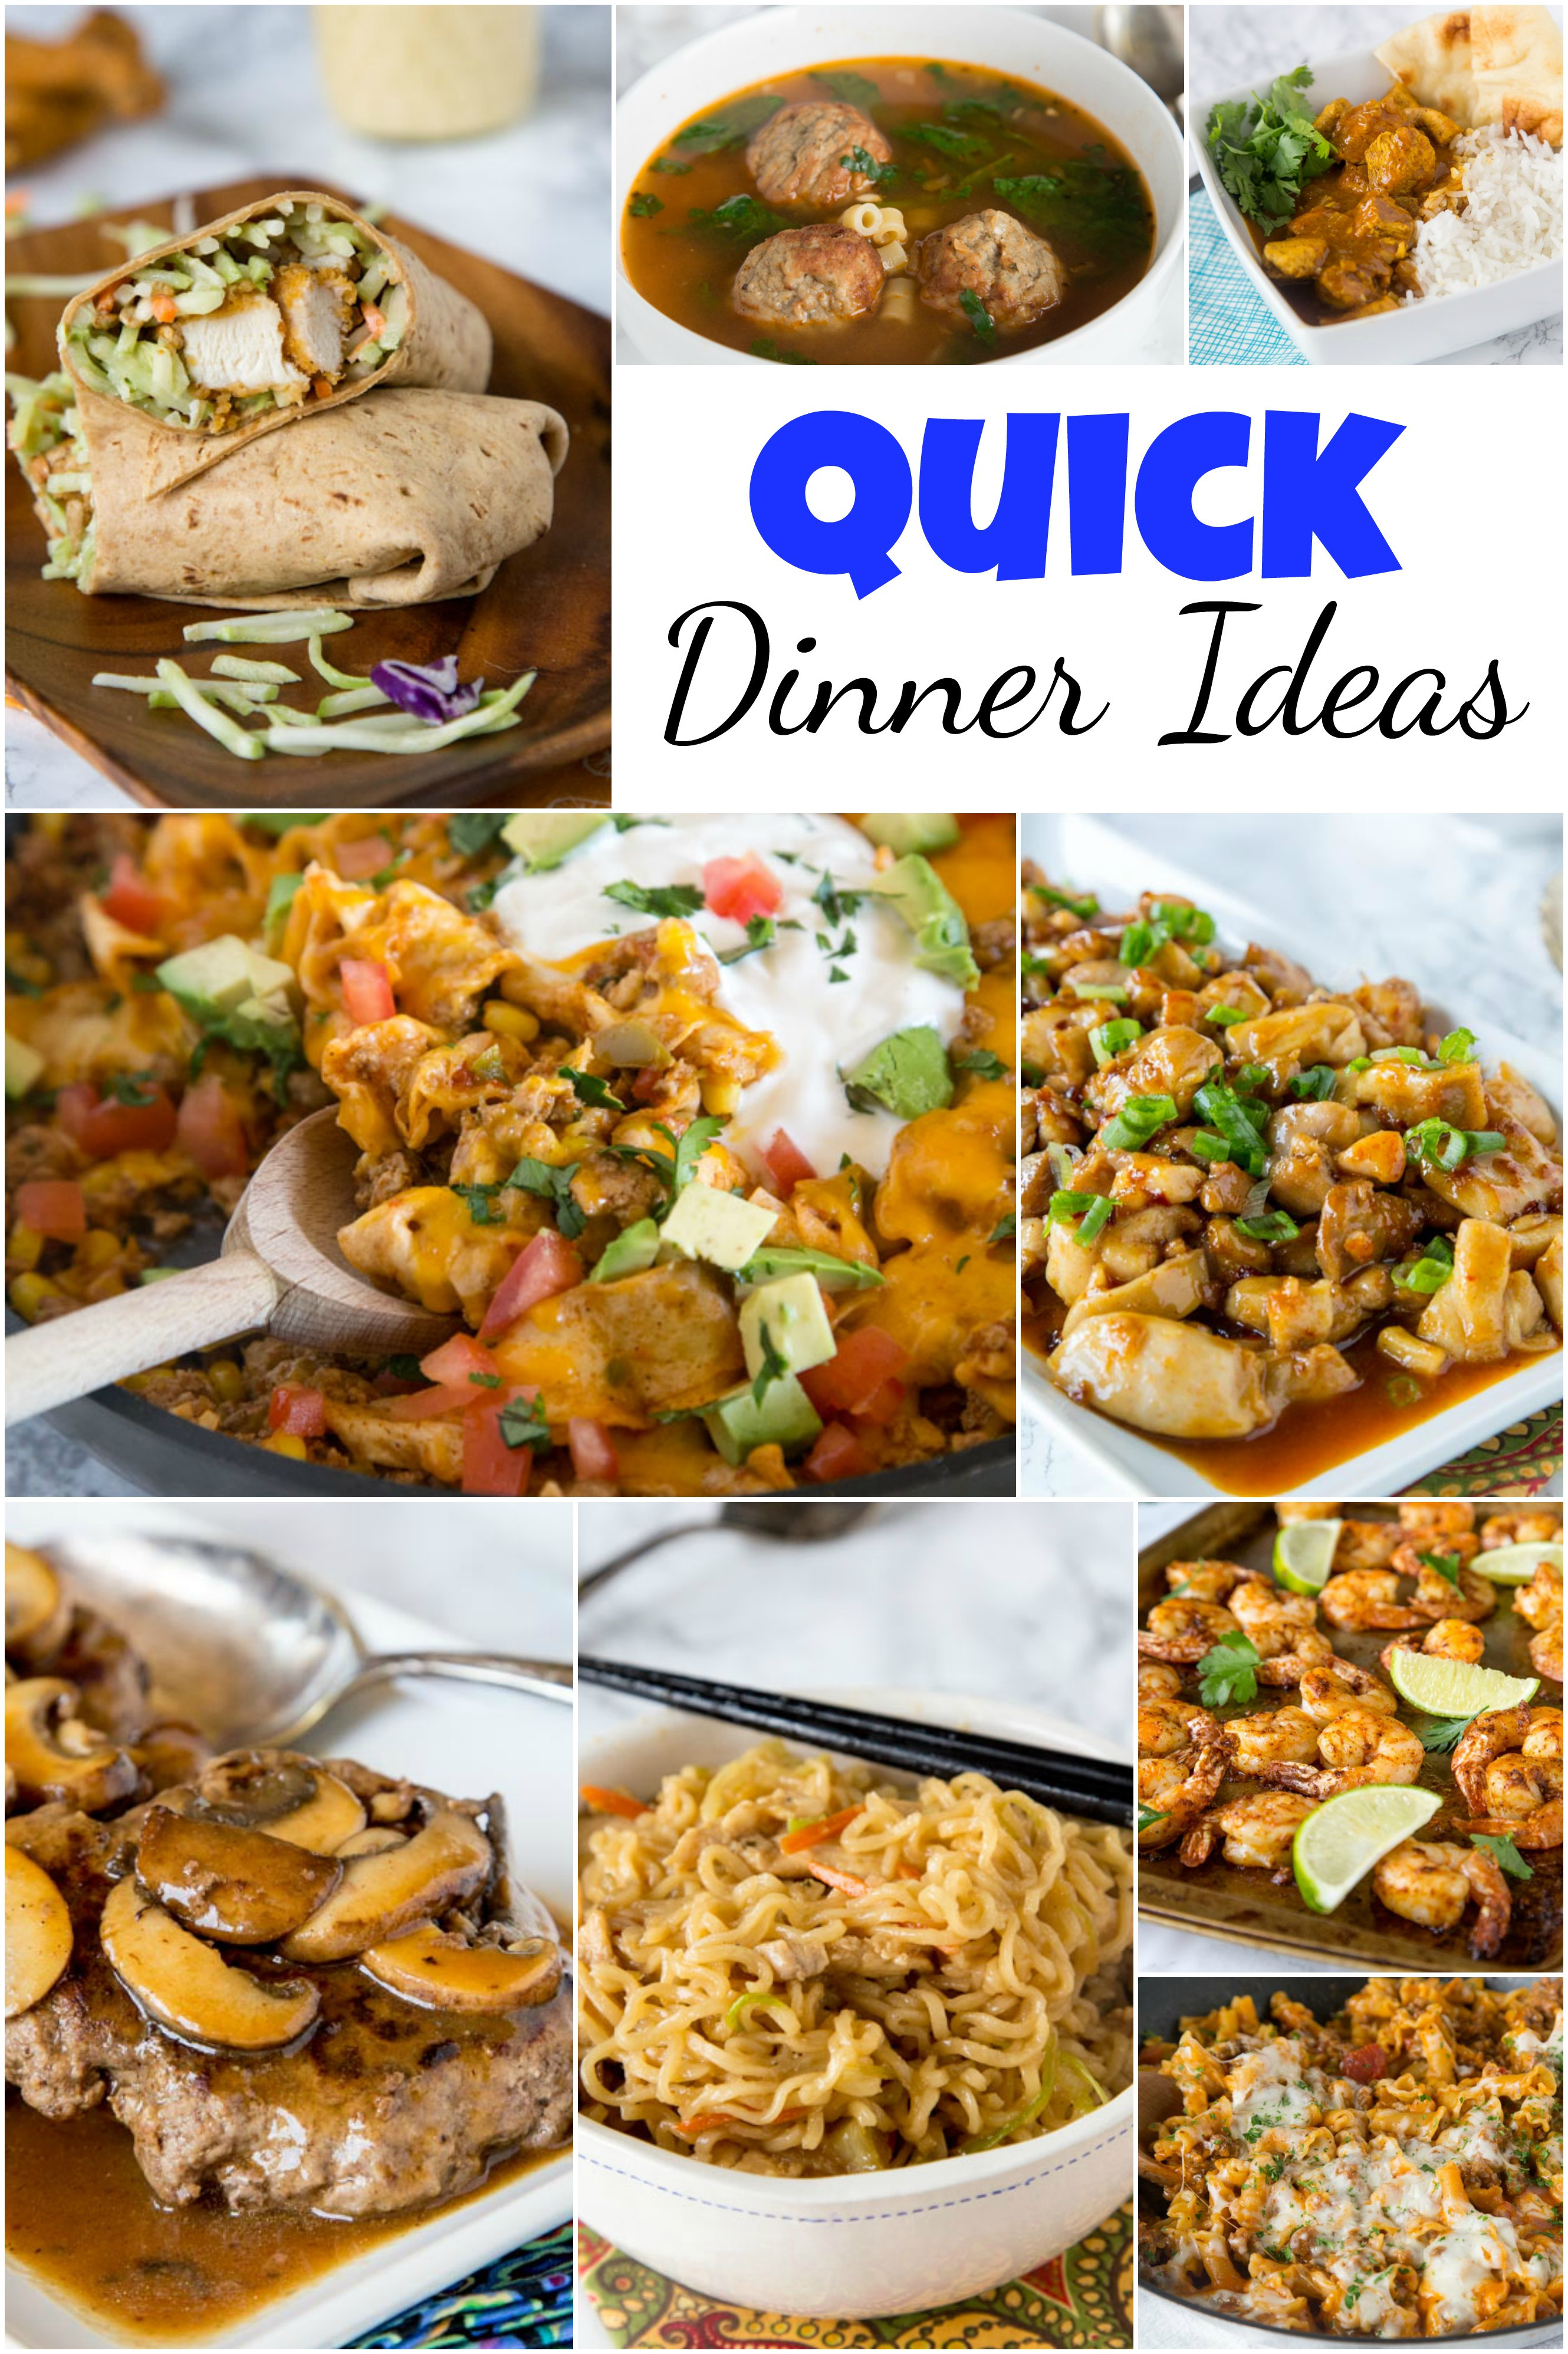 Fast Easy Dinners Recipes
 Quick Dinner Ideas Dinners Dishes and Desserts